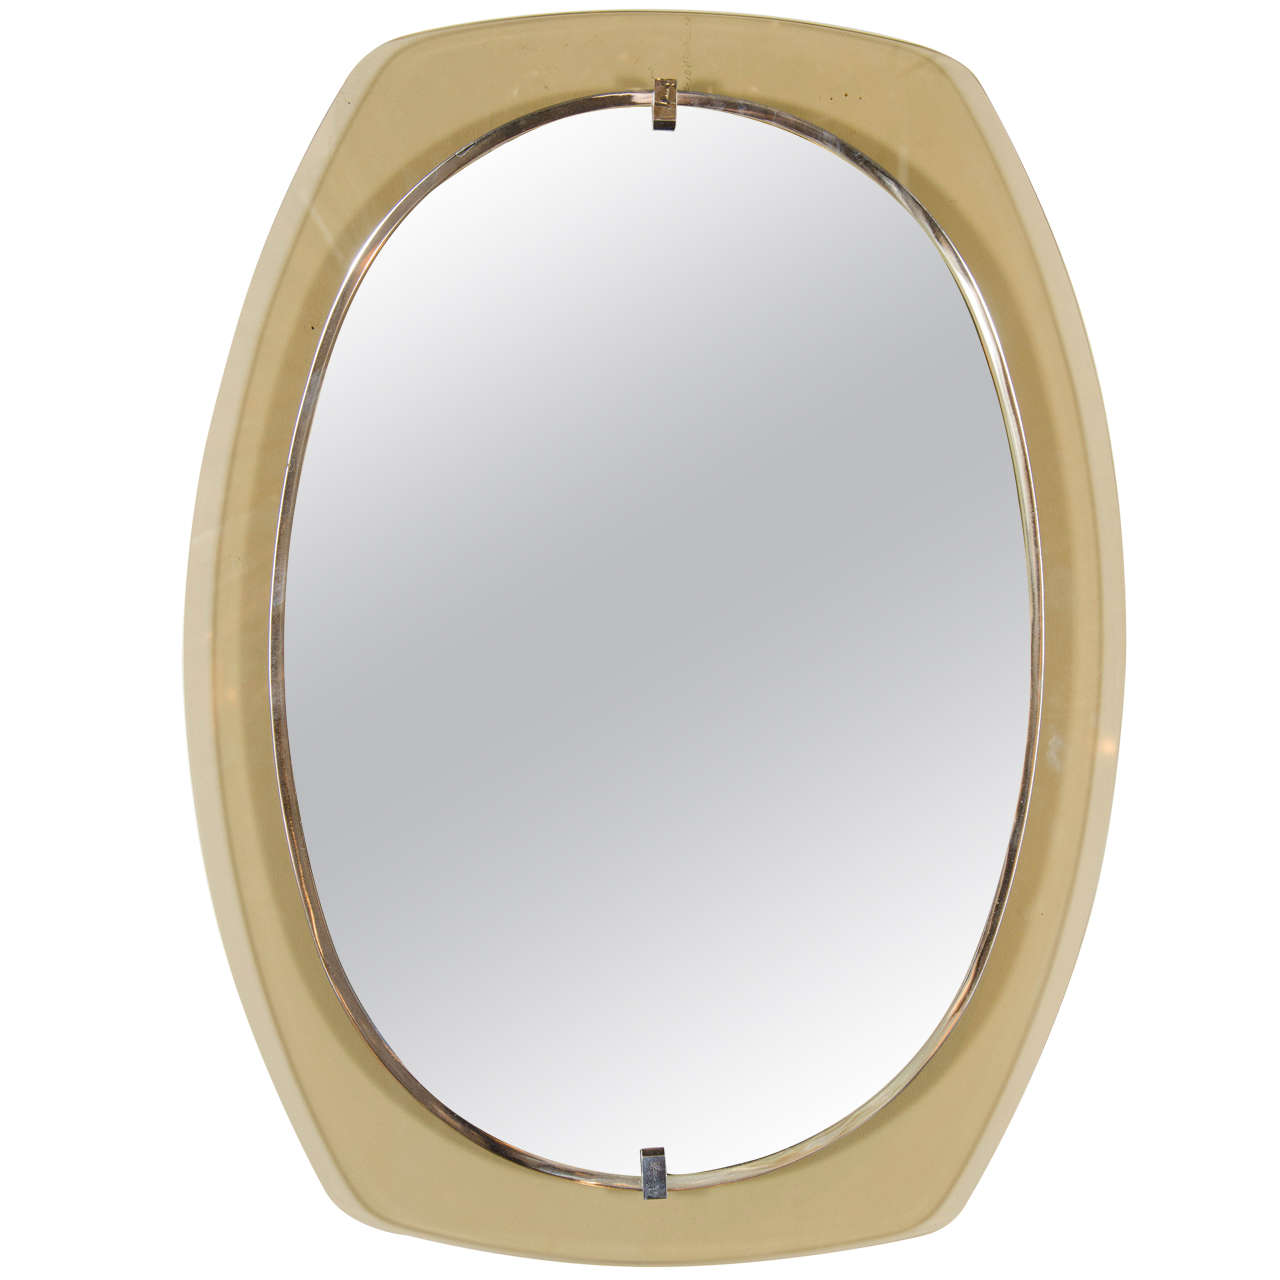 Exceptional Mid-Century Modern Wall Mirror in the Manner of Fontana Arte